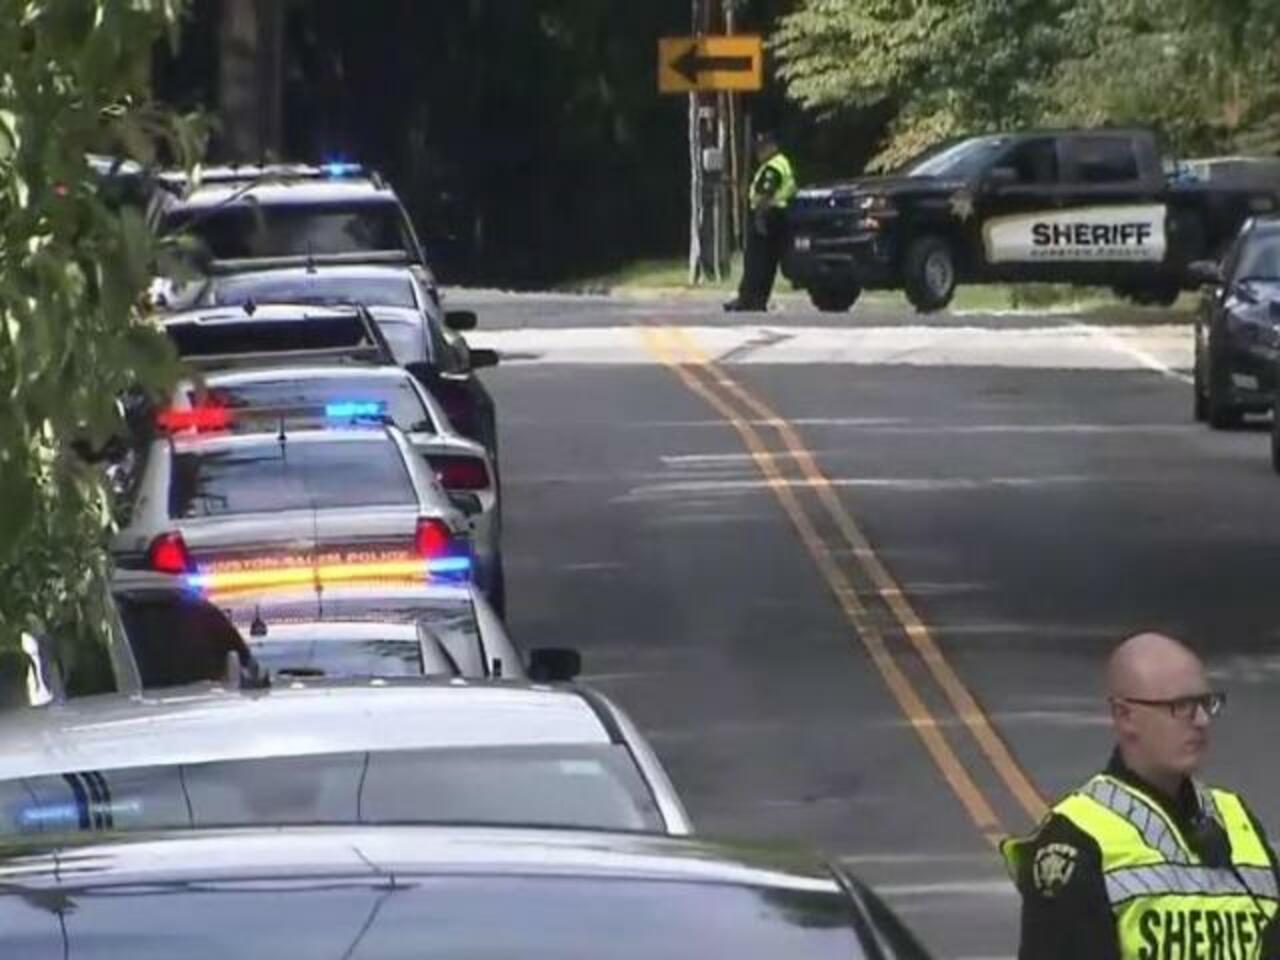 Parents, local leaders ask why after NC's 2nd school shooting this week :: WRAL.com